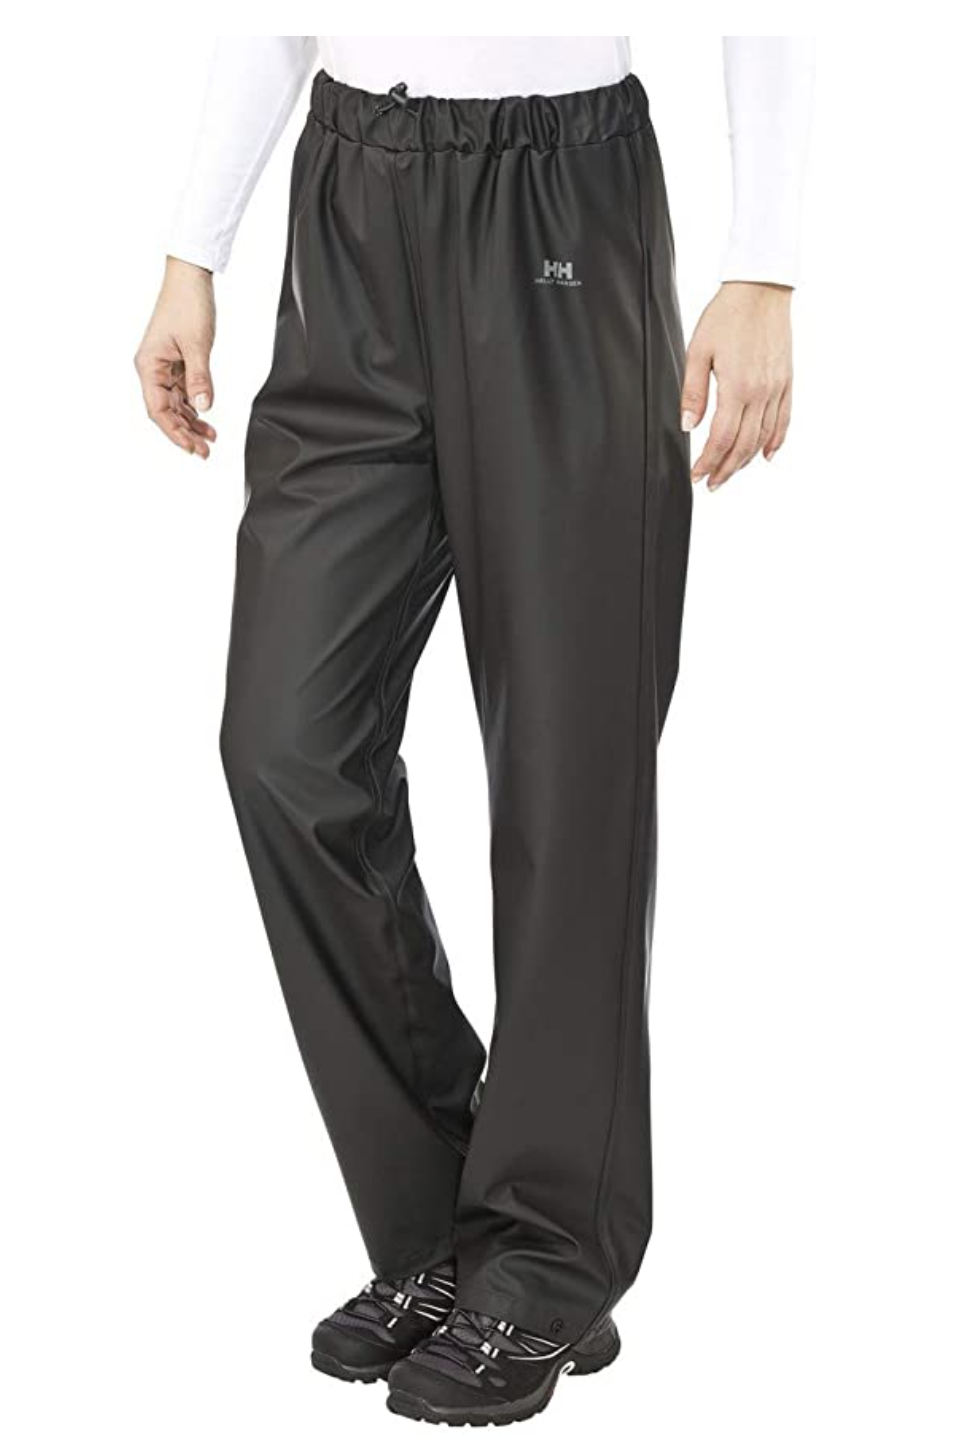 black winter pants for women with elastic waistband